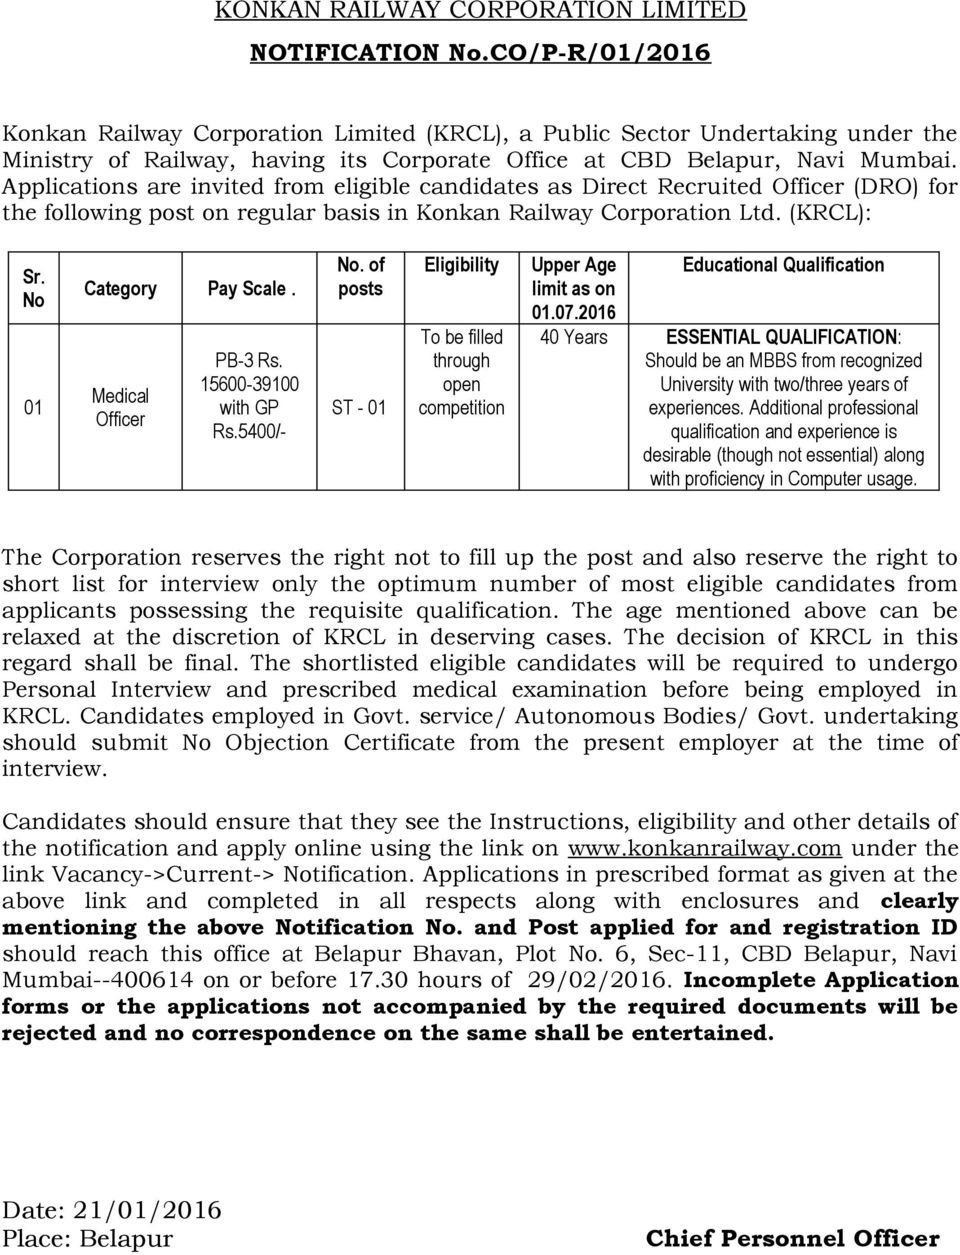 Applications are invited from eligible candidates as Direct Recruited Officer (DRO) for the following post on regular basis in Konkan Railway Corporation Ltd. (KRCL): Sr. No 01 Category Pay Scale.